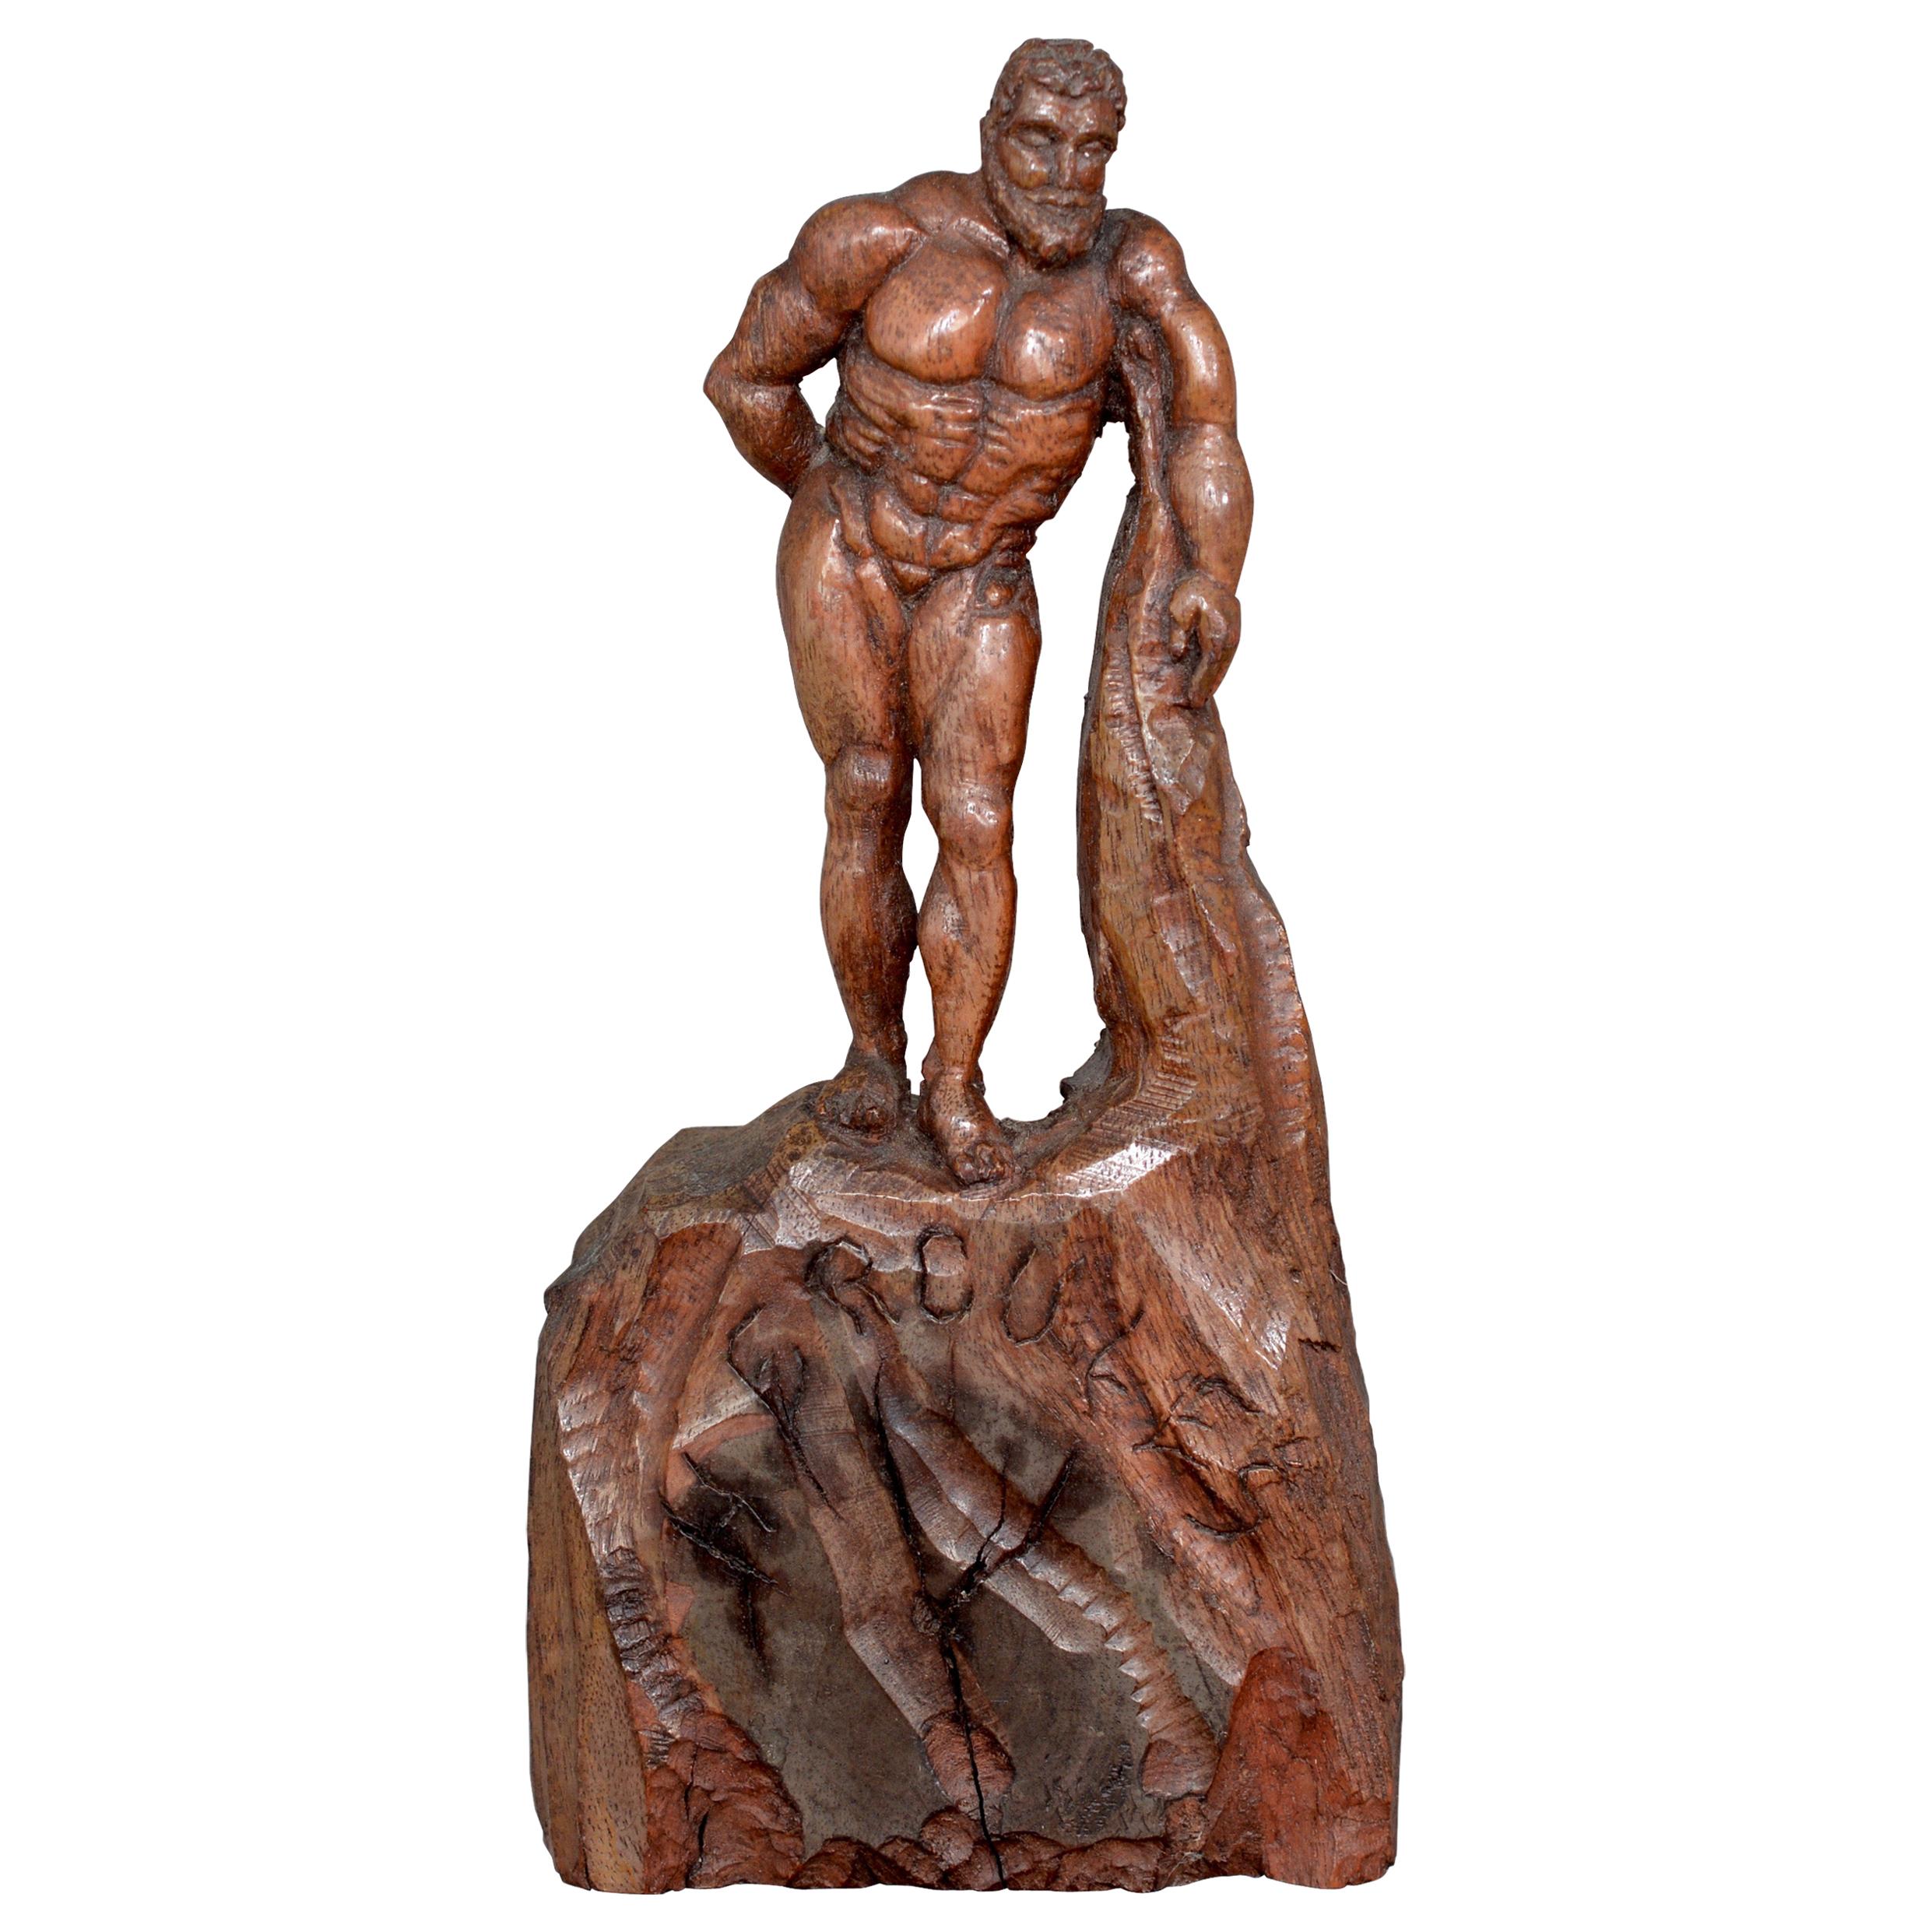 Hand Carved Wooden Figure of Hercules, circa 1900